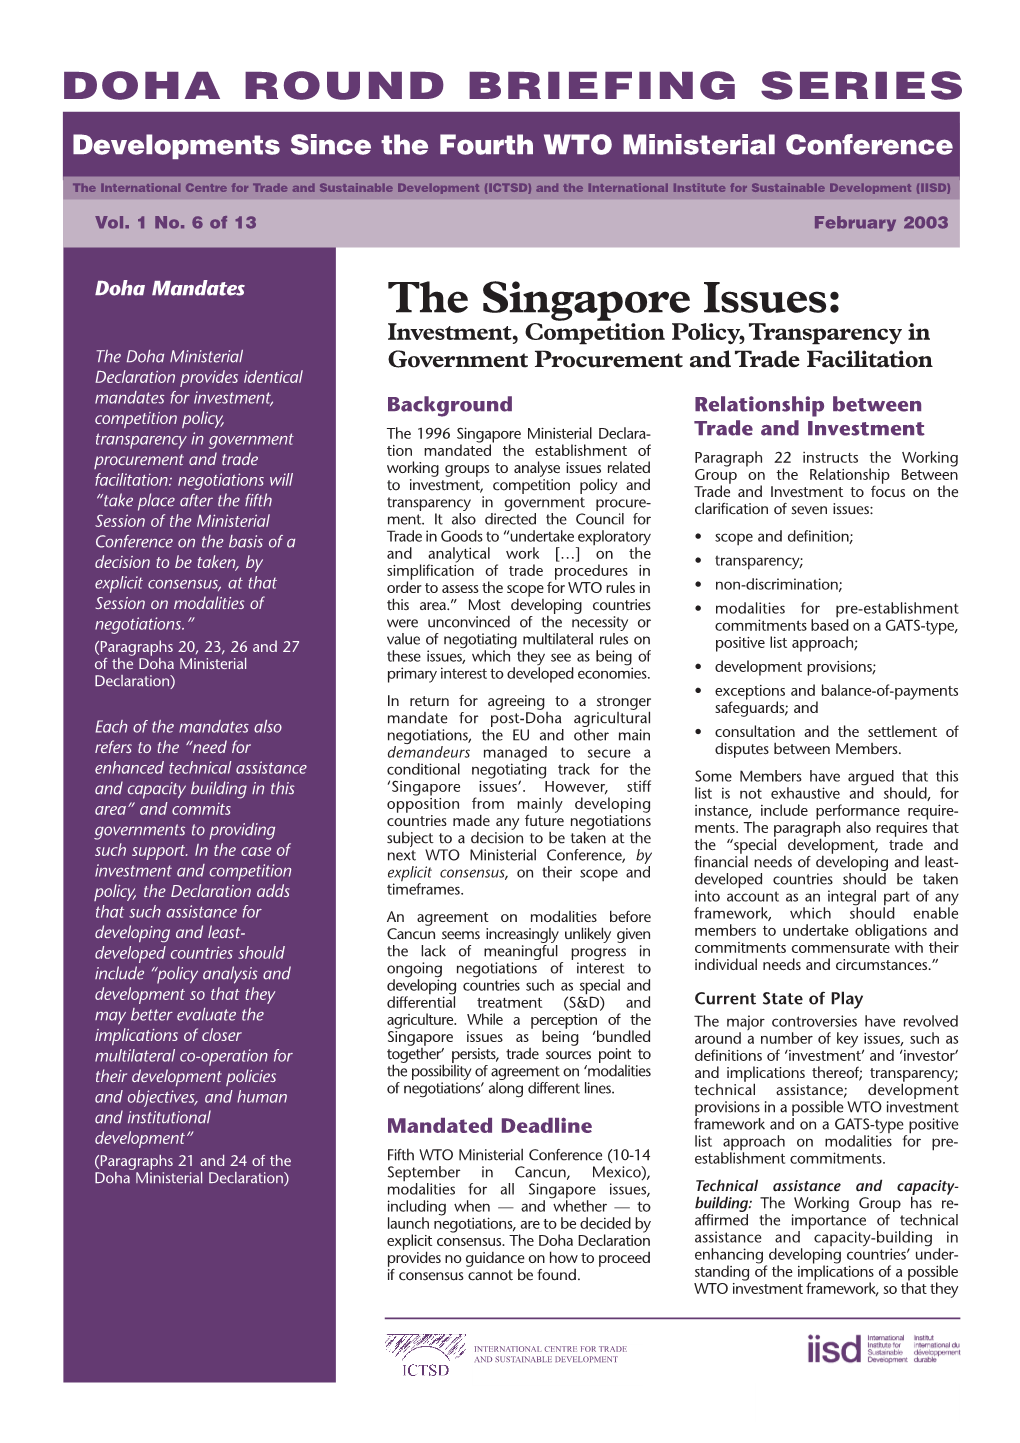 The Singapore Issues: Investment, Competition Policy, Transparency